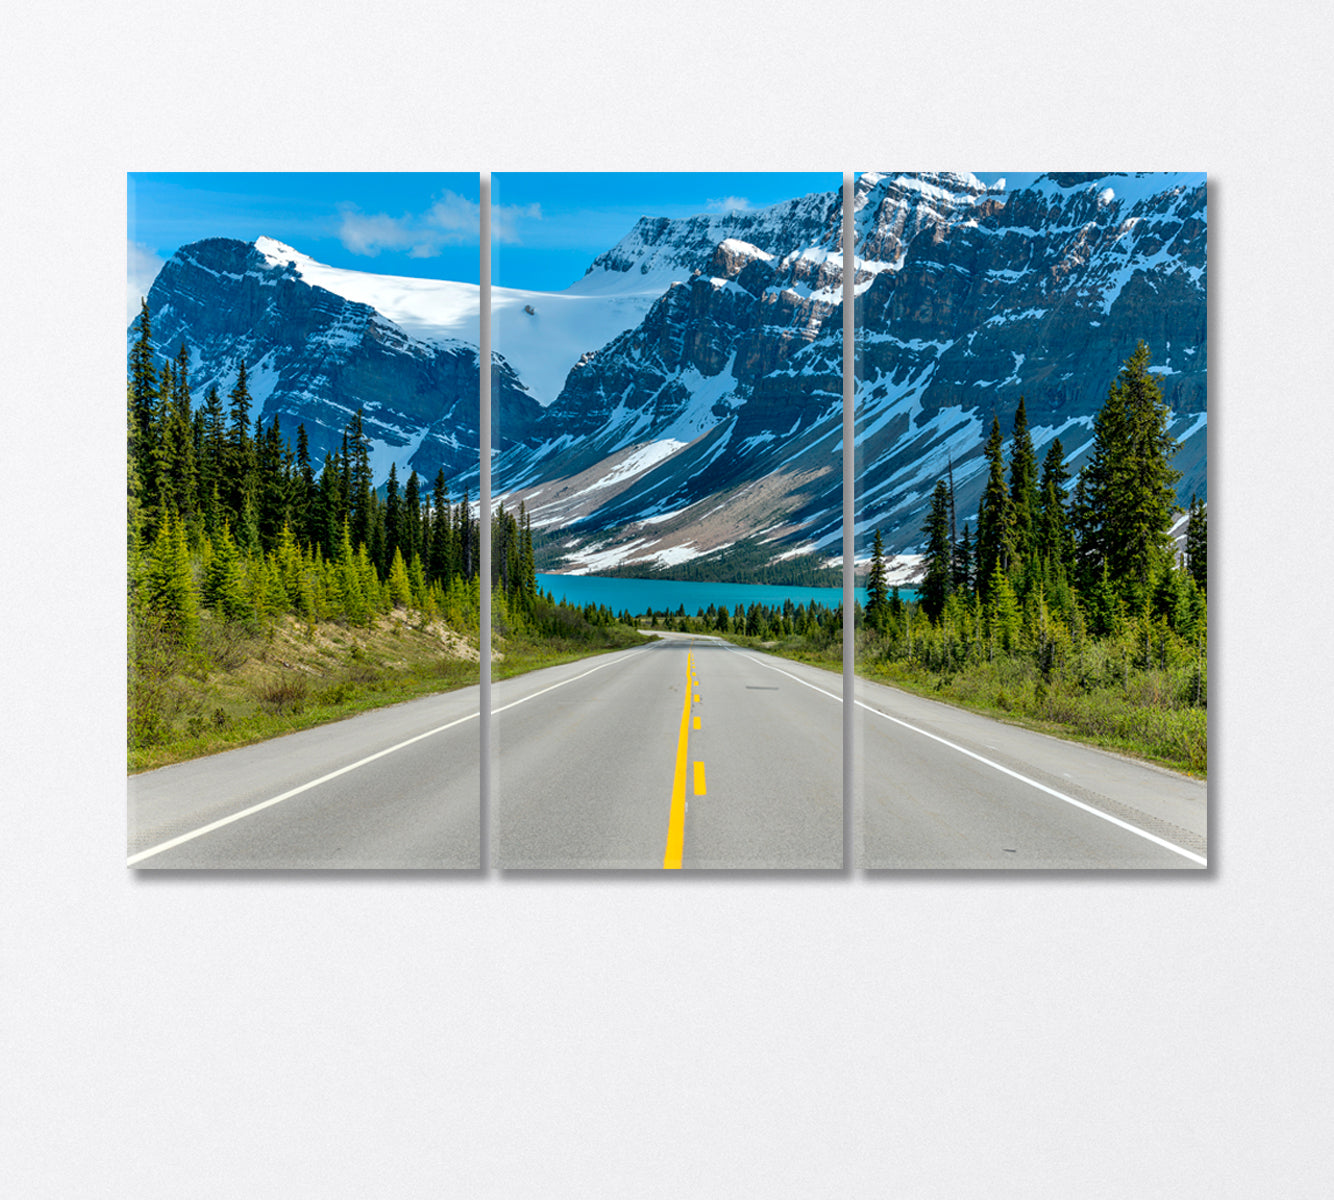 Road to the Rocky Snow Сapped Mountains Banff Park Canada Canvas Print-Canvas Print-CetArt-3 Panels-36x24 inches-CetArt